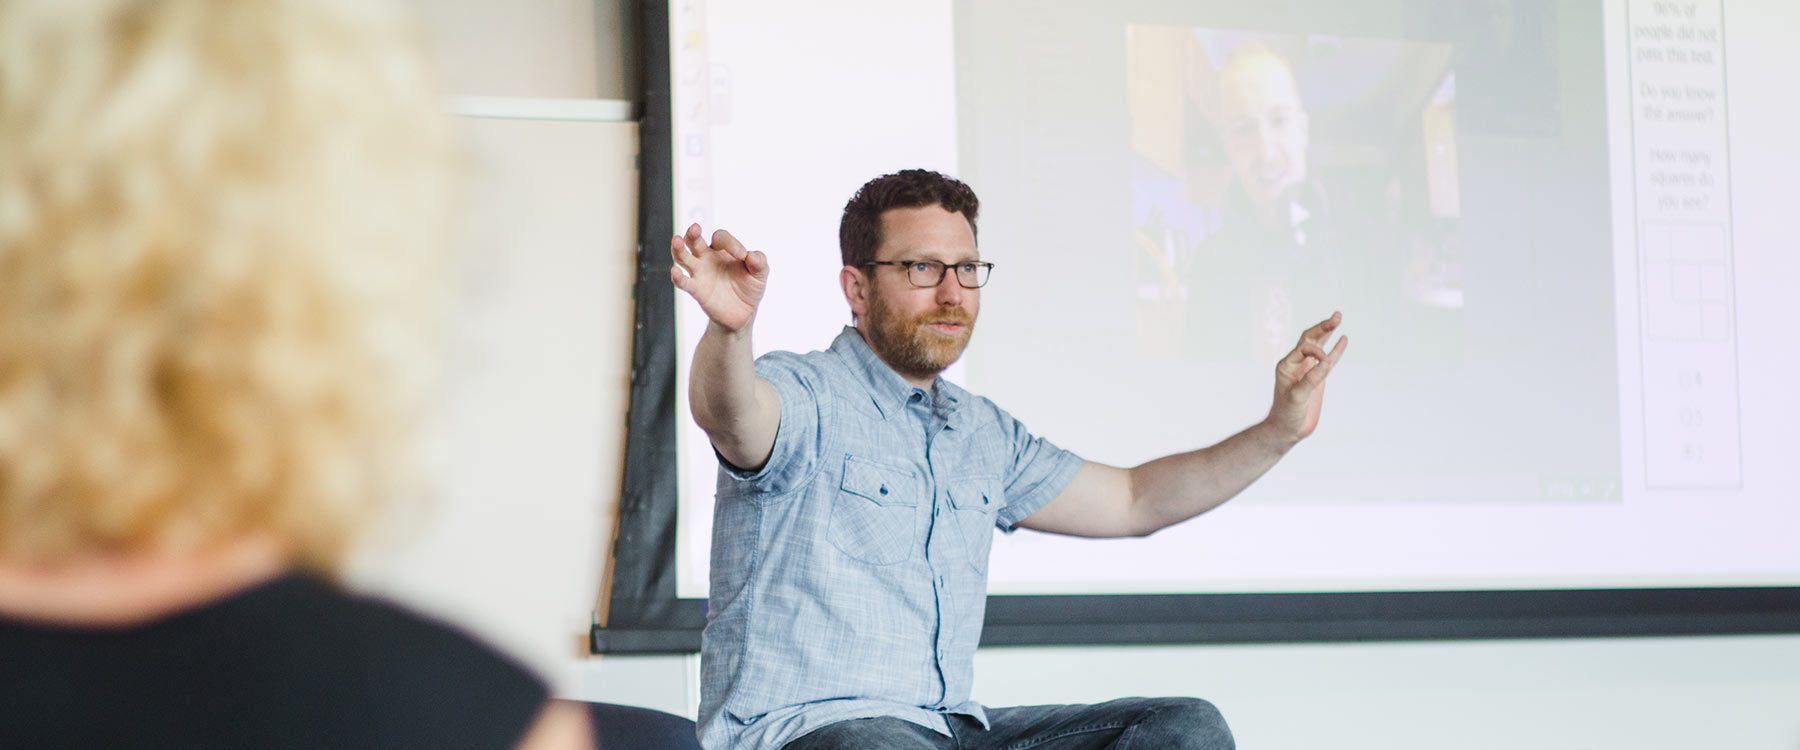 Professor Fred Johnson gestures with both arms in front of a projector screen, presenting an English lecture.